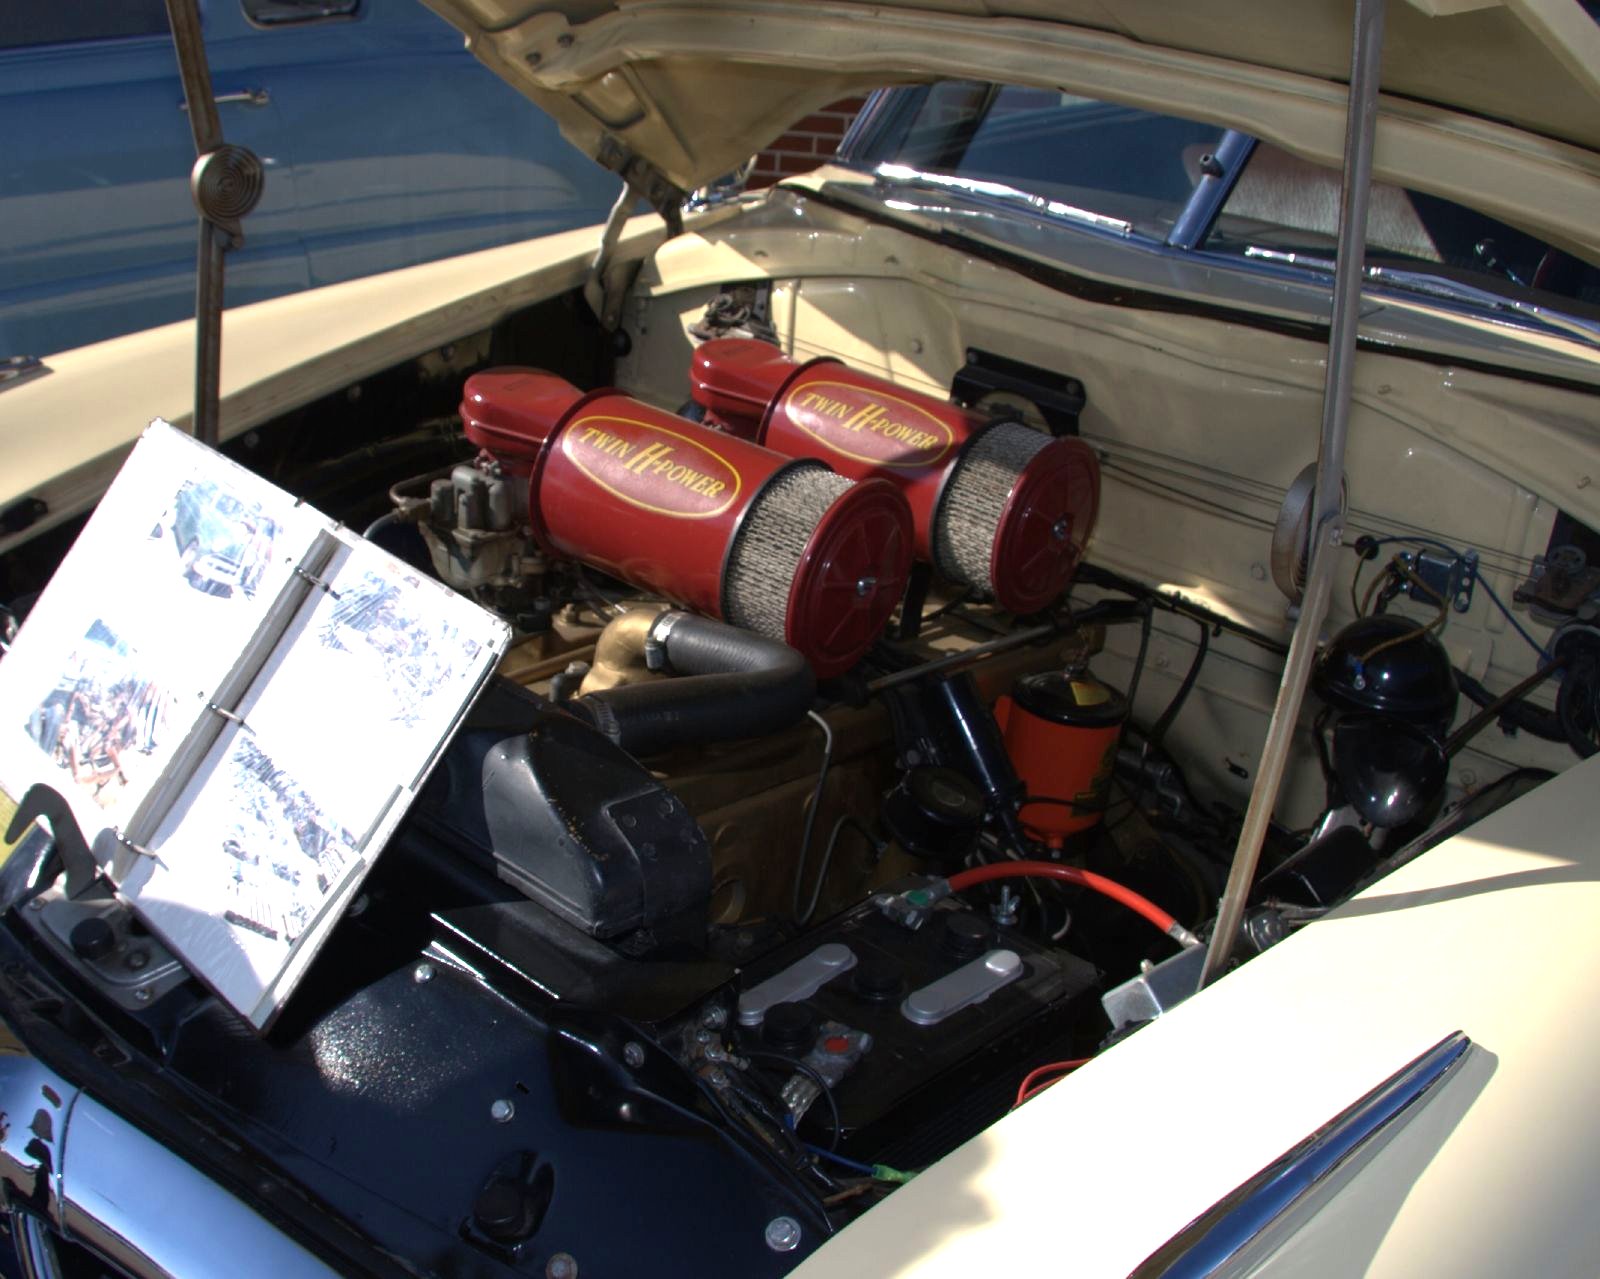 the engine compartment in a classic sports car